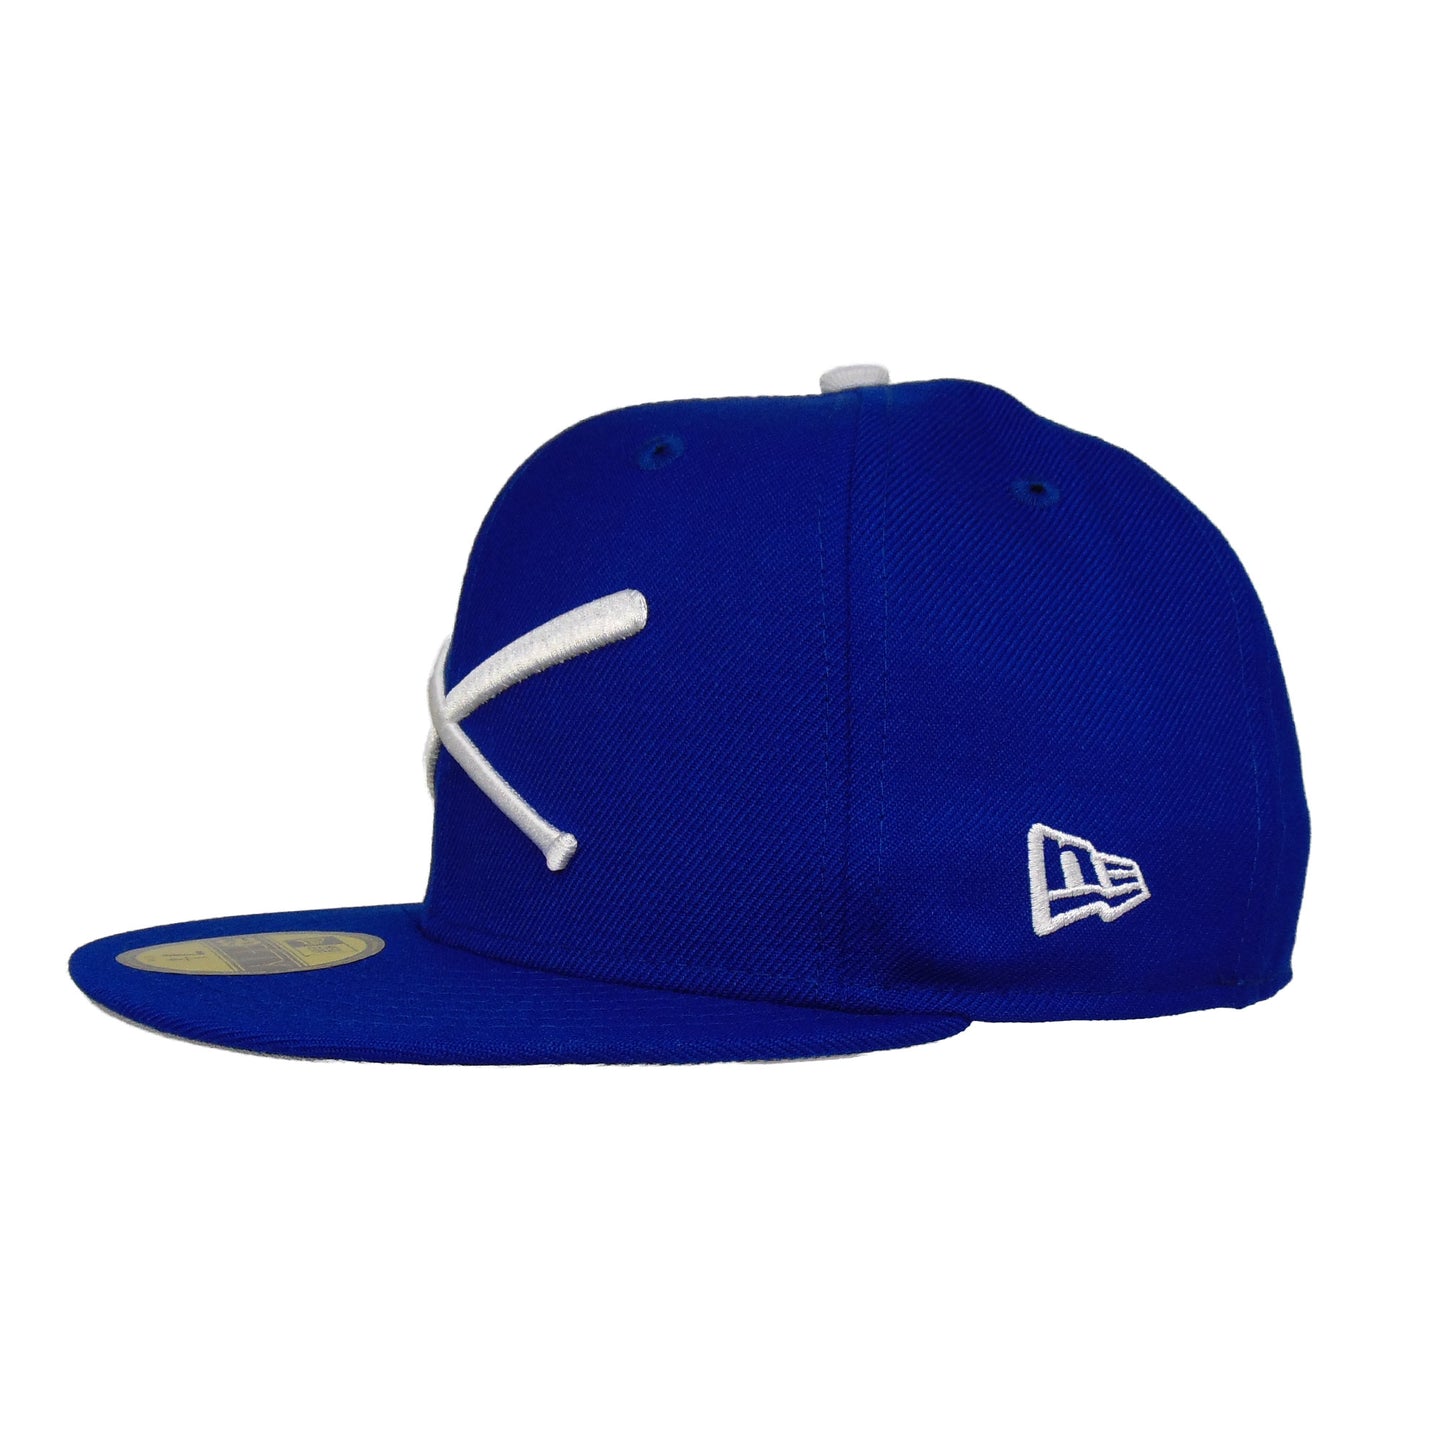 JustFitteds Crossed Bats Logo New Era 59FIFTY Cap Royal